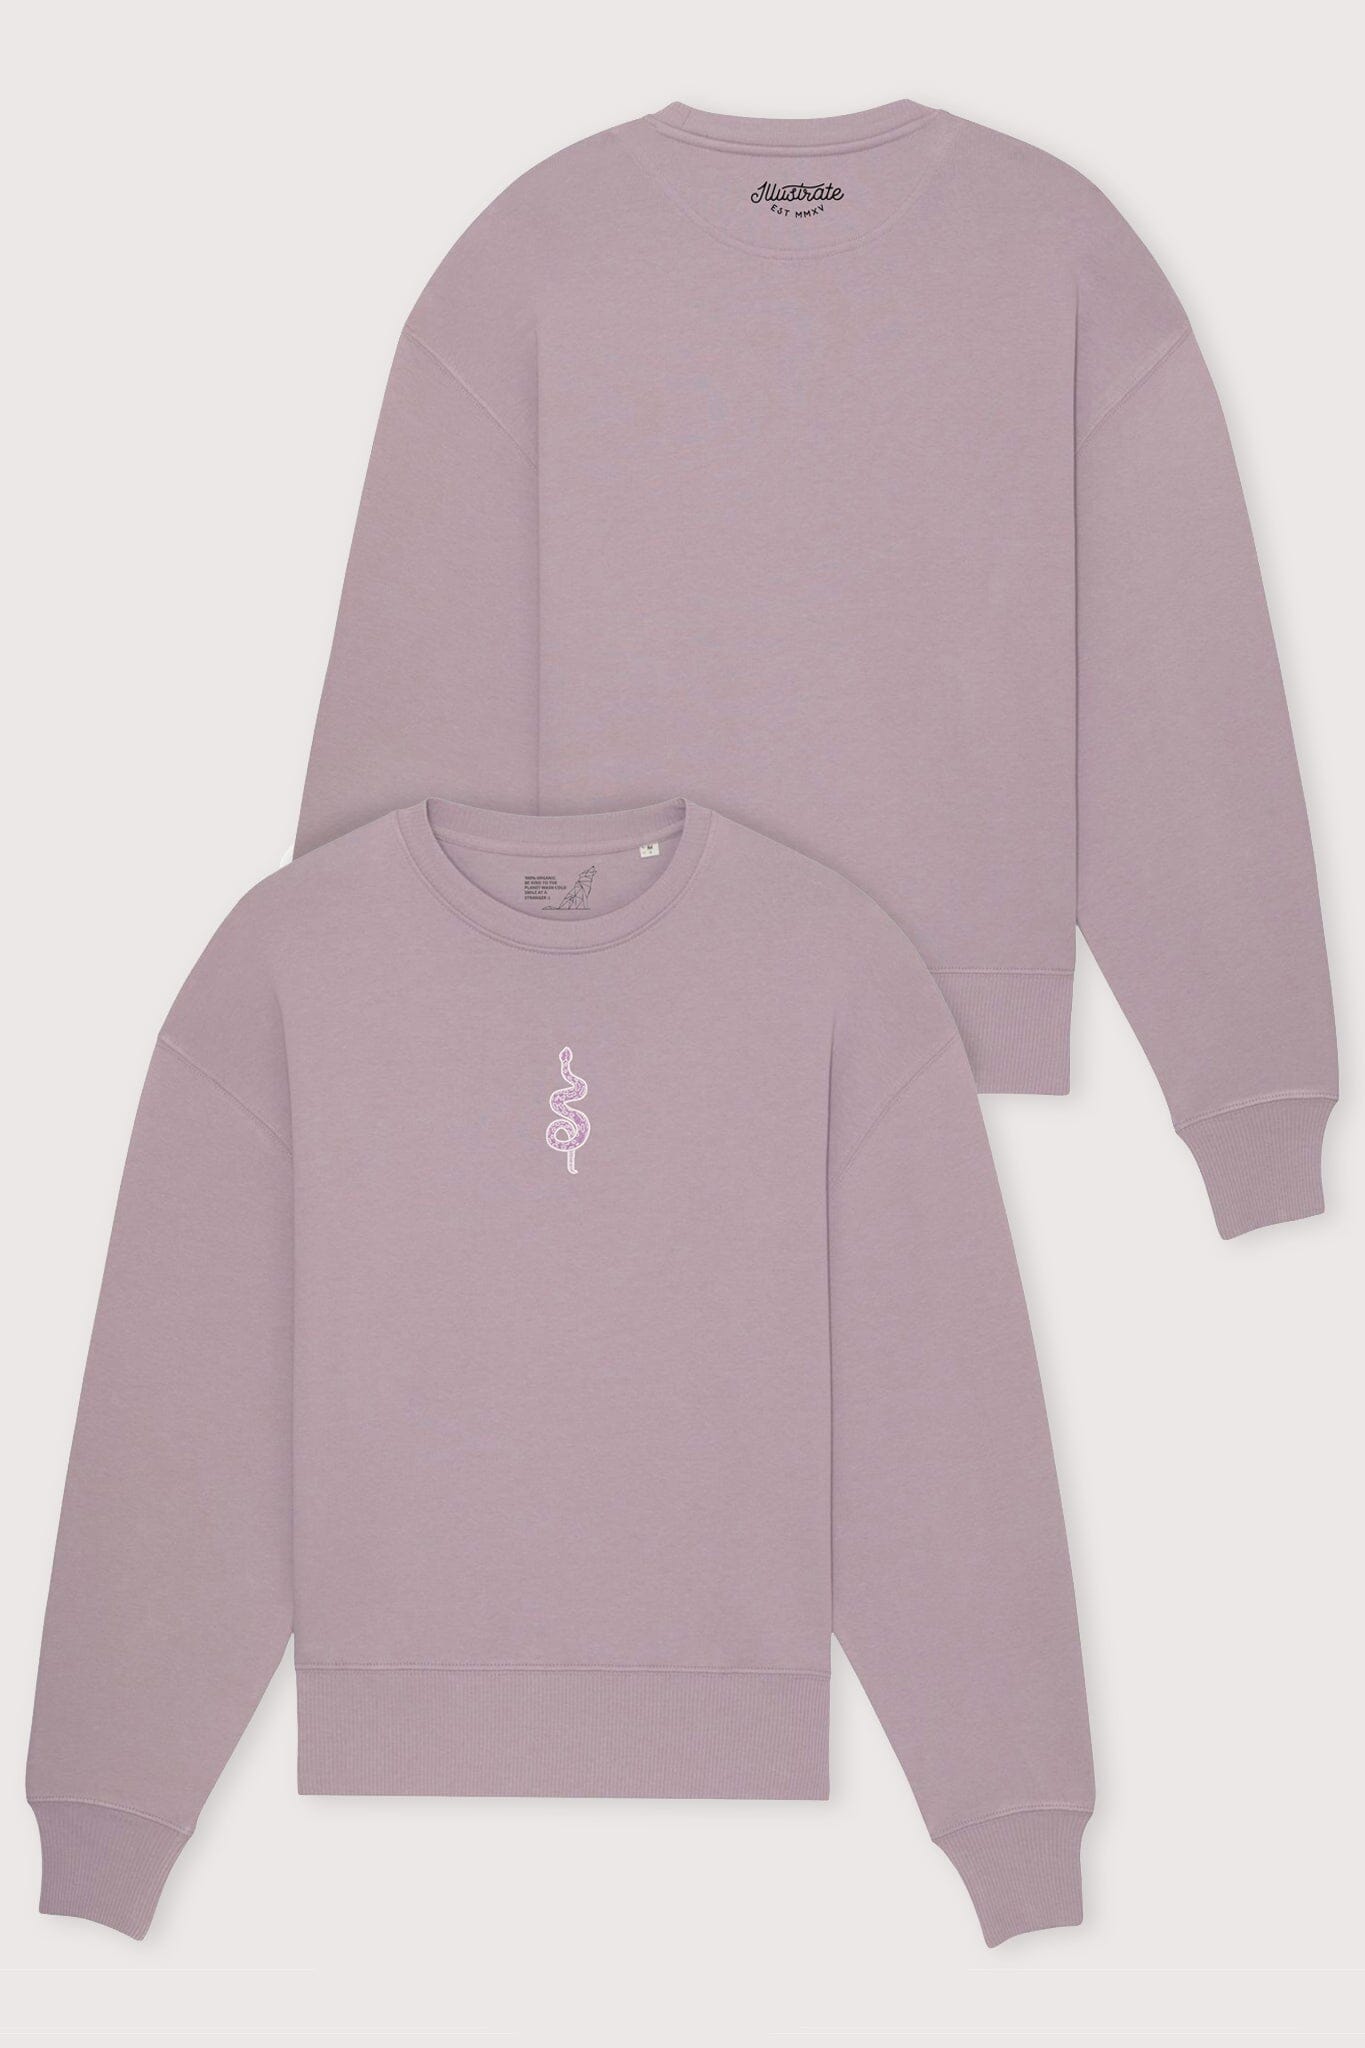 Men's Relaxed Sweatshirt | Embroidered Snake